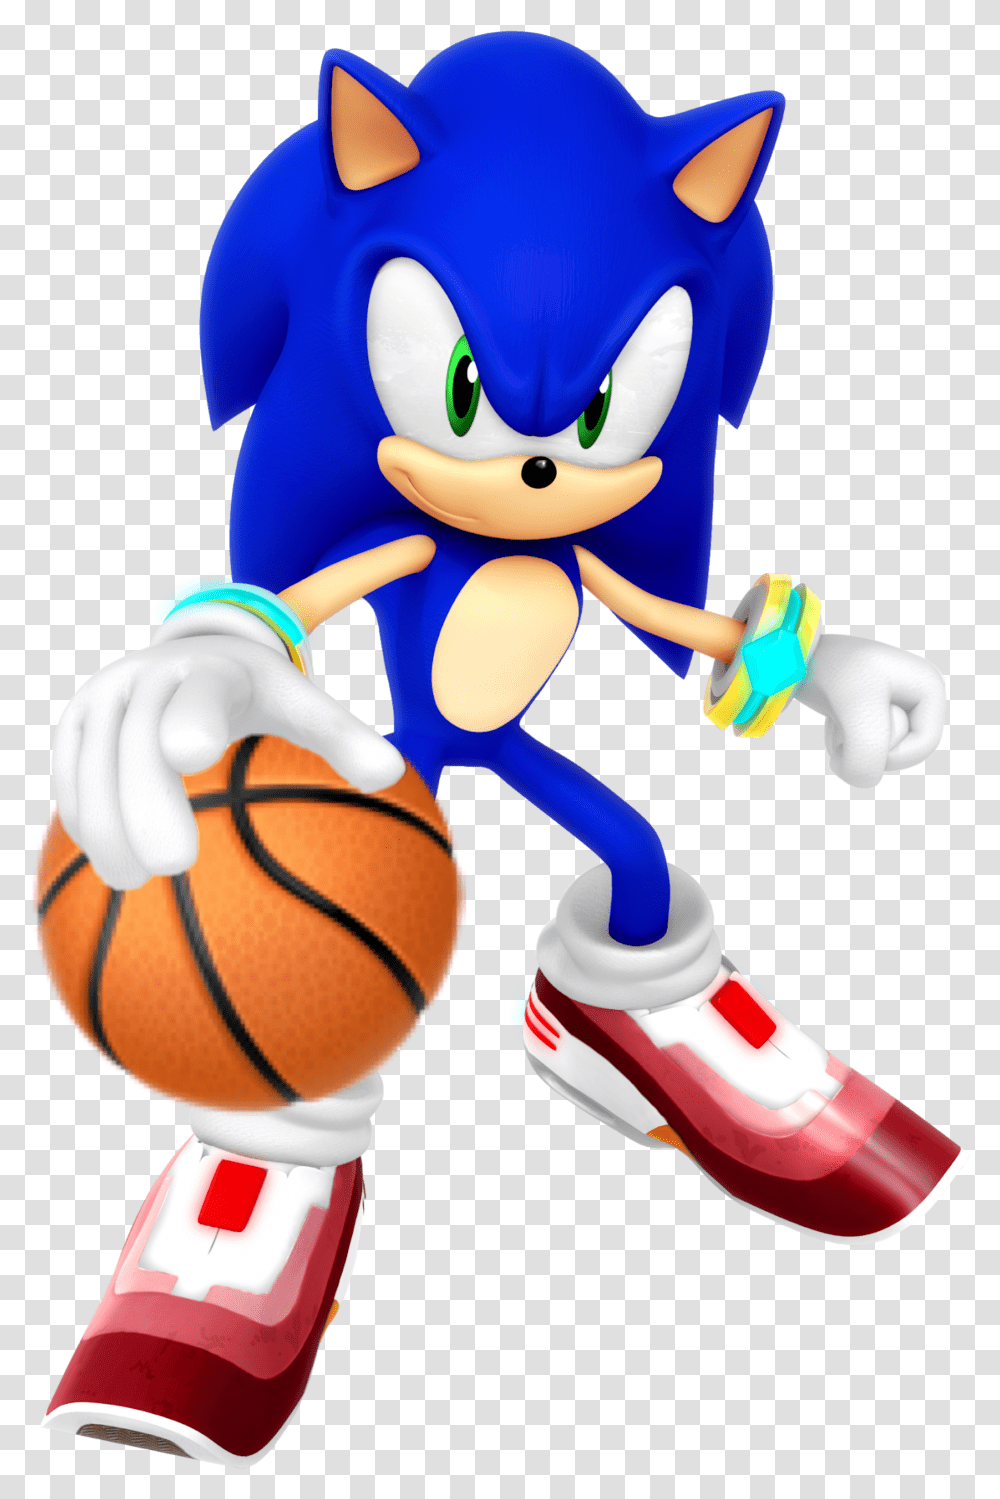 Sonicthehedgehog Sonic Basketball Sticker By I Am B Sonic 06 Bounce Bracelet, Toy, Team Sport, Sports, Sweets Transparent Png